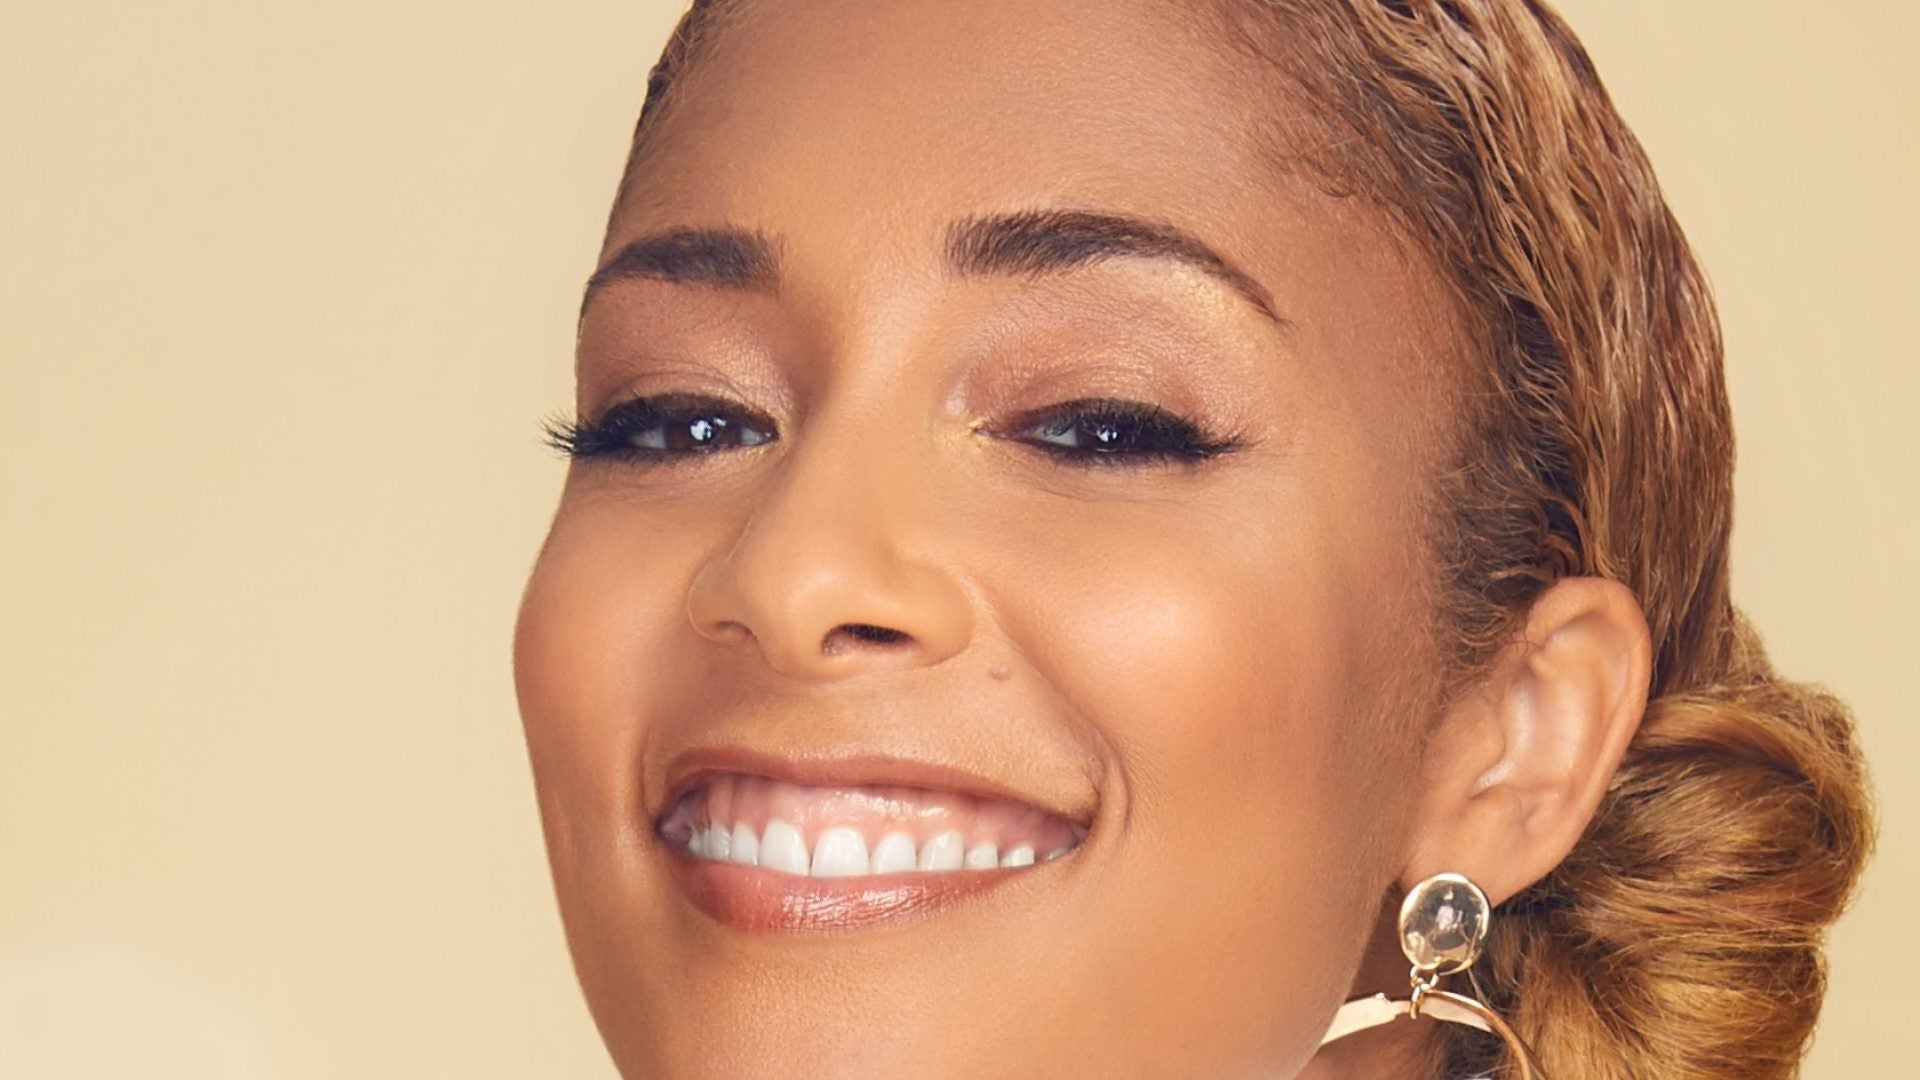 Amanda Seales Takes A Hilarious Dive Into Politics With New Documentary, 'In Amanda We Trust'